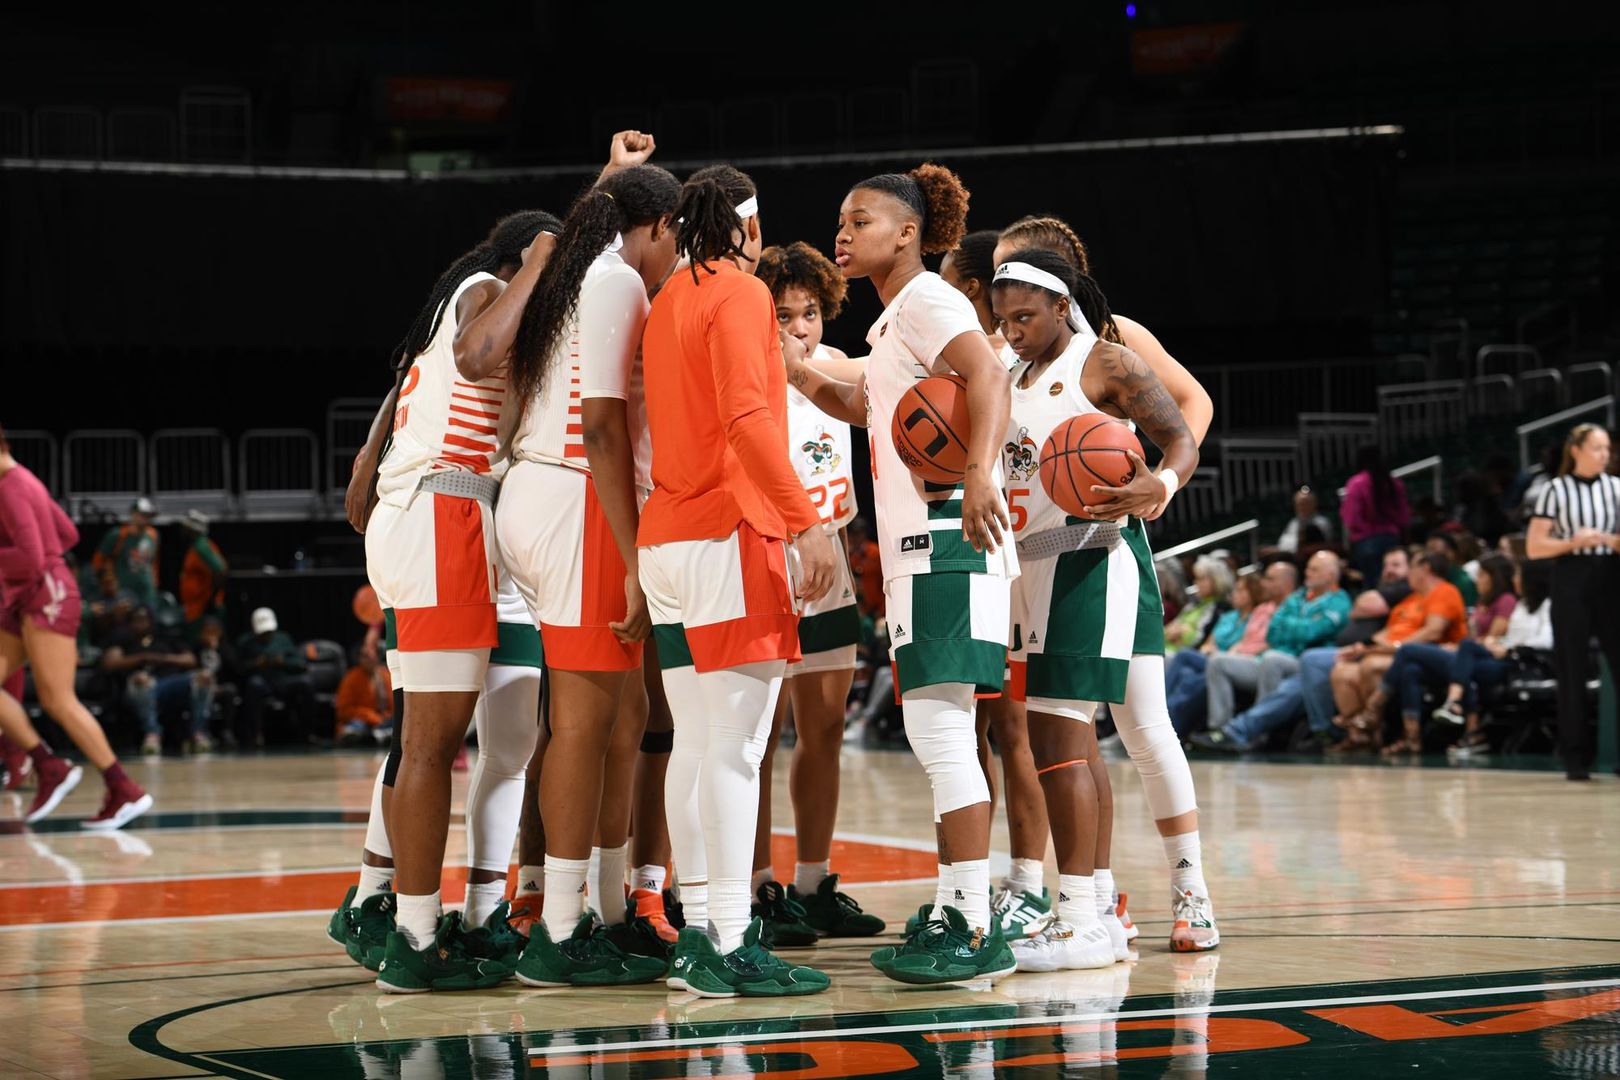 Miami WBB Special to Air on ACC Network on Sunday